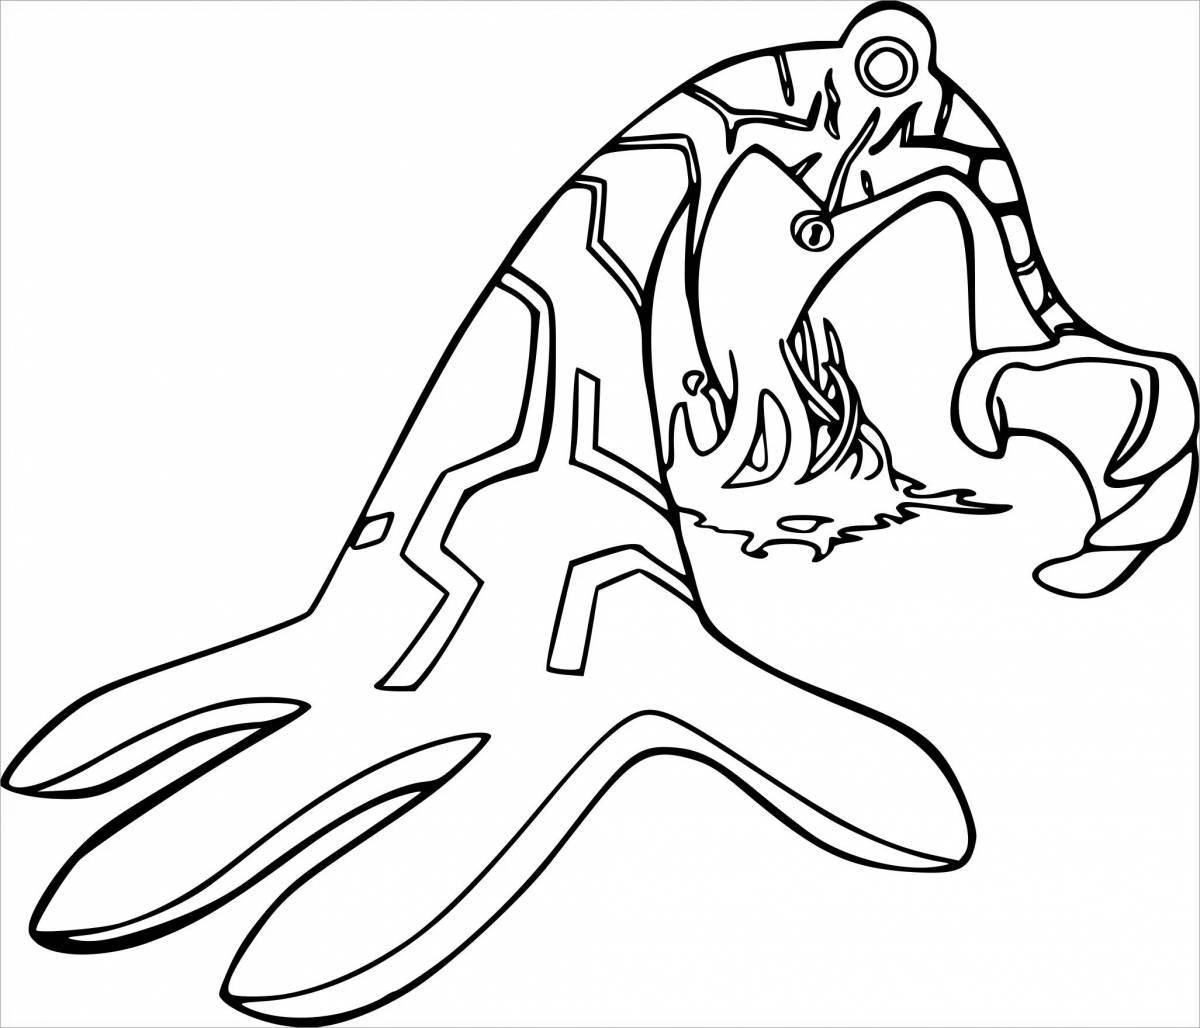 Adorable bitter eater coloring page